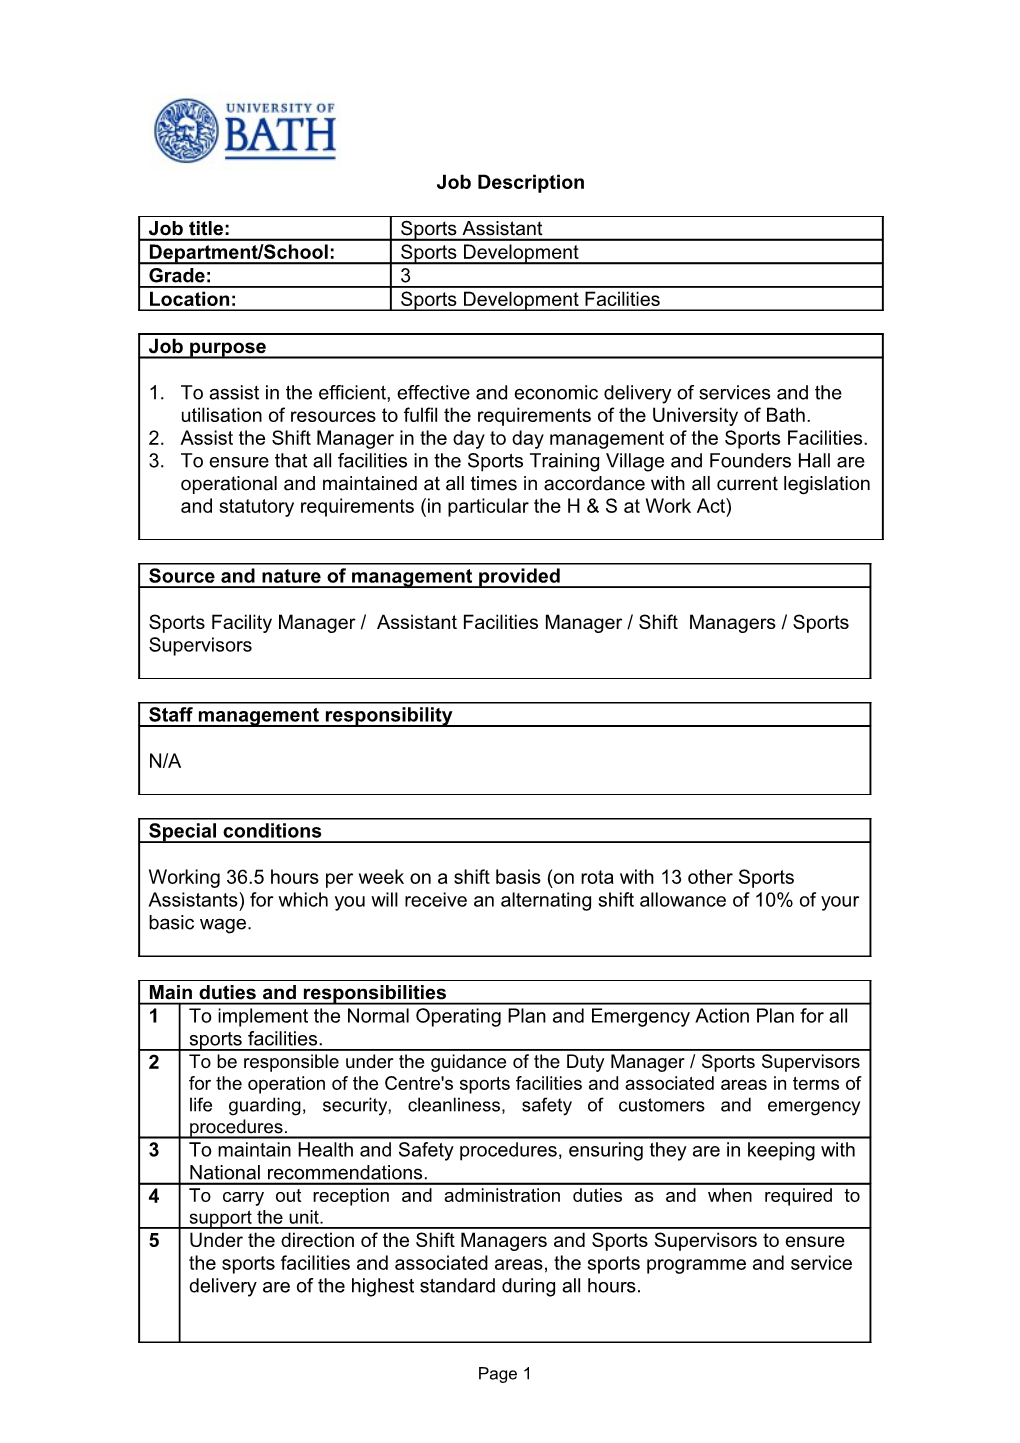 Person Specification s41